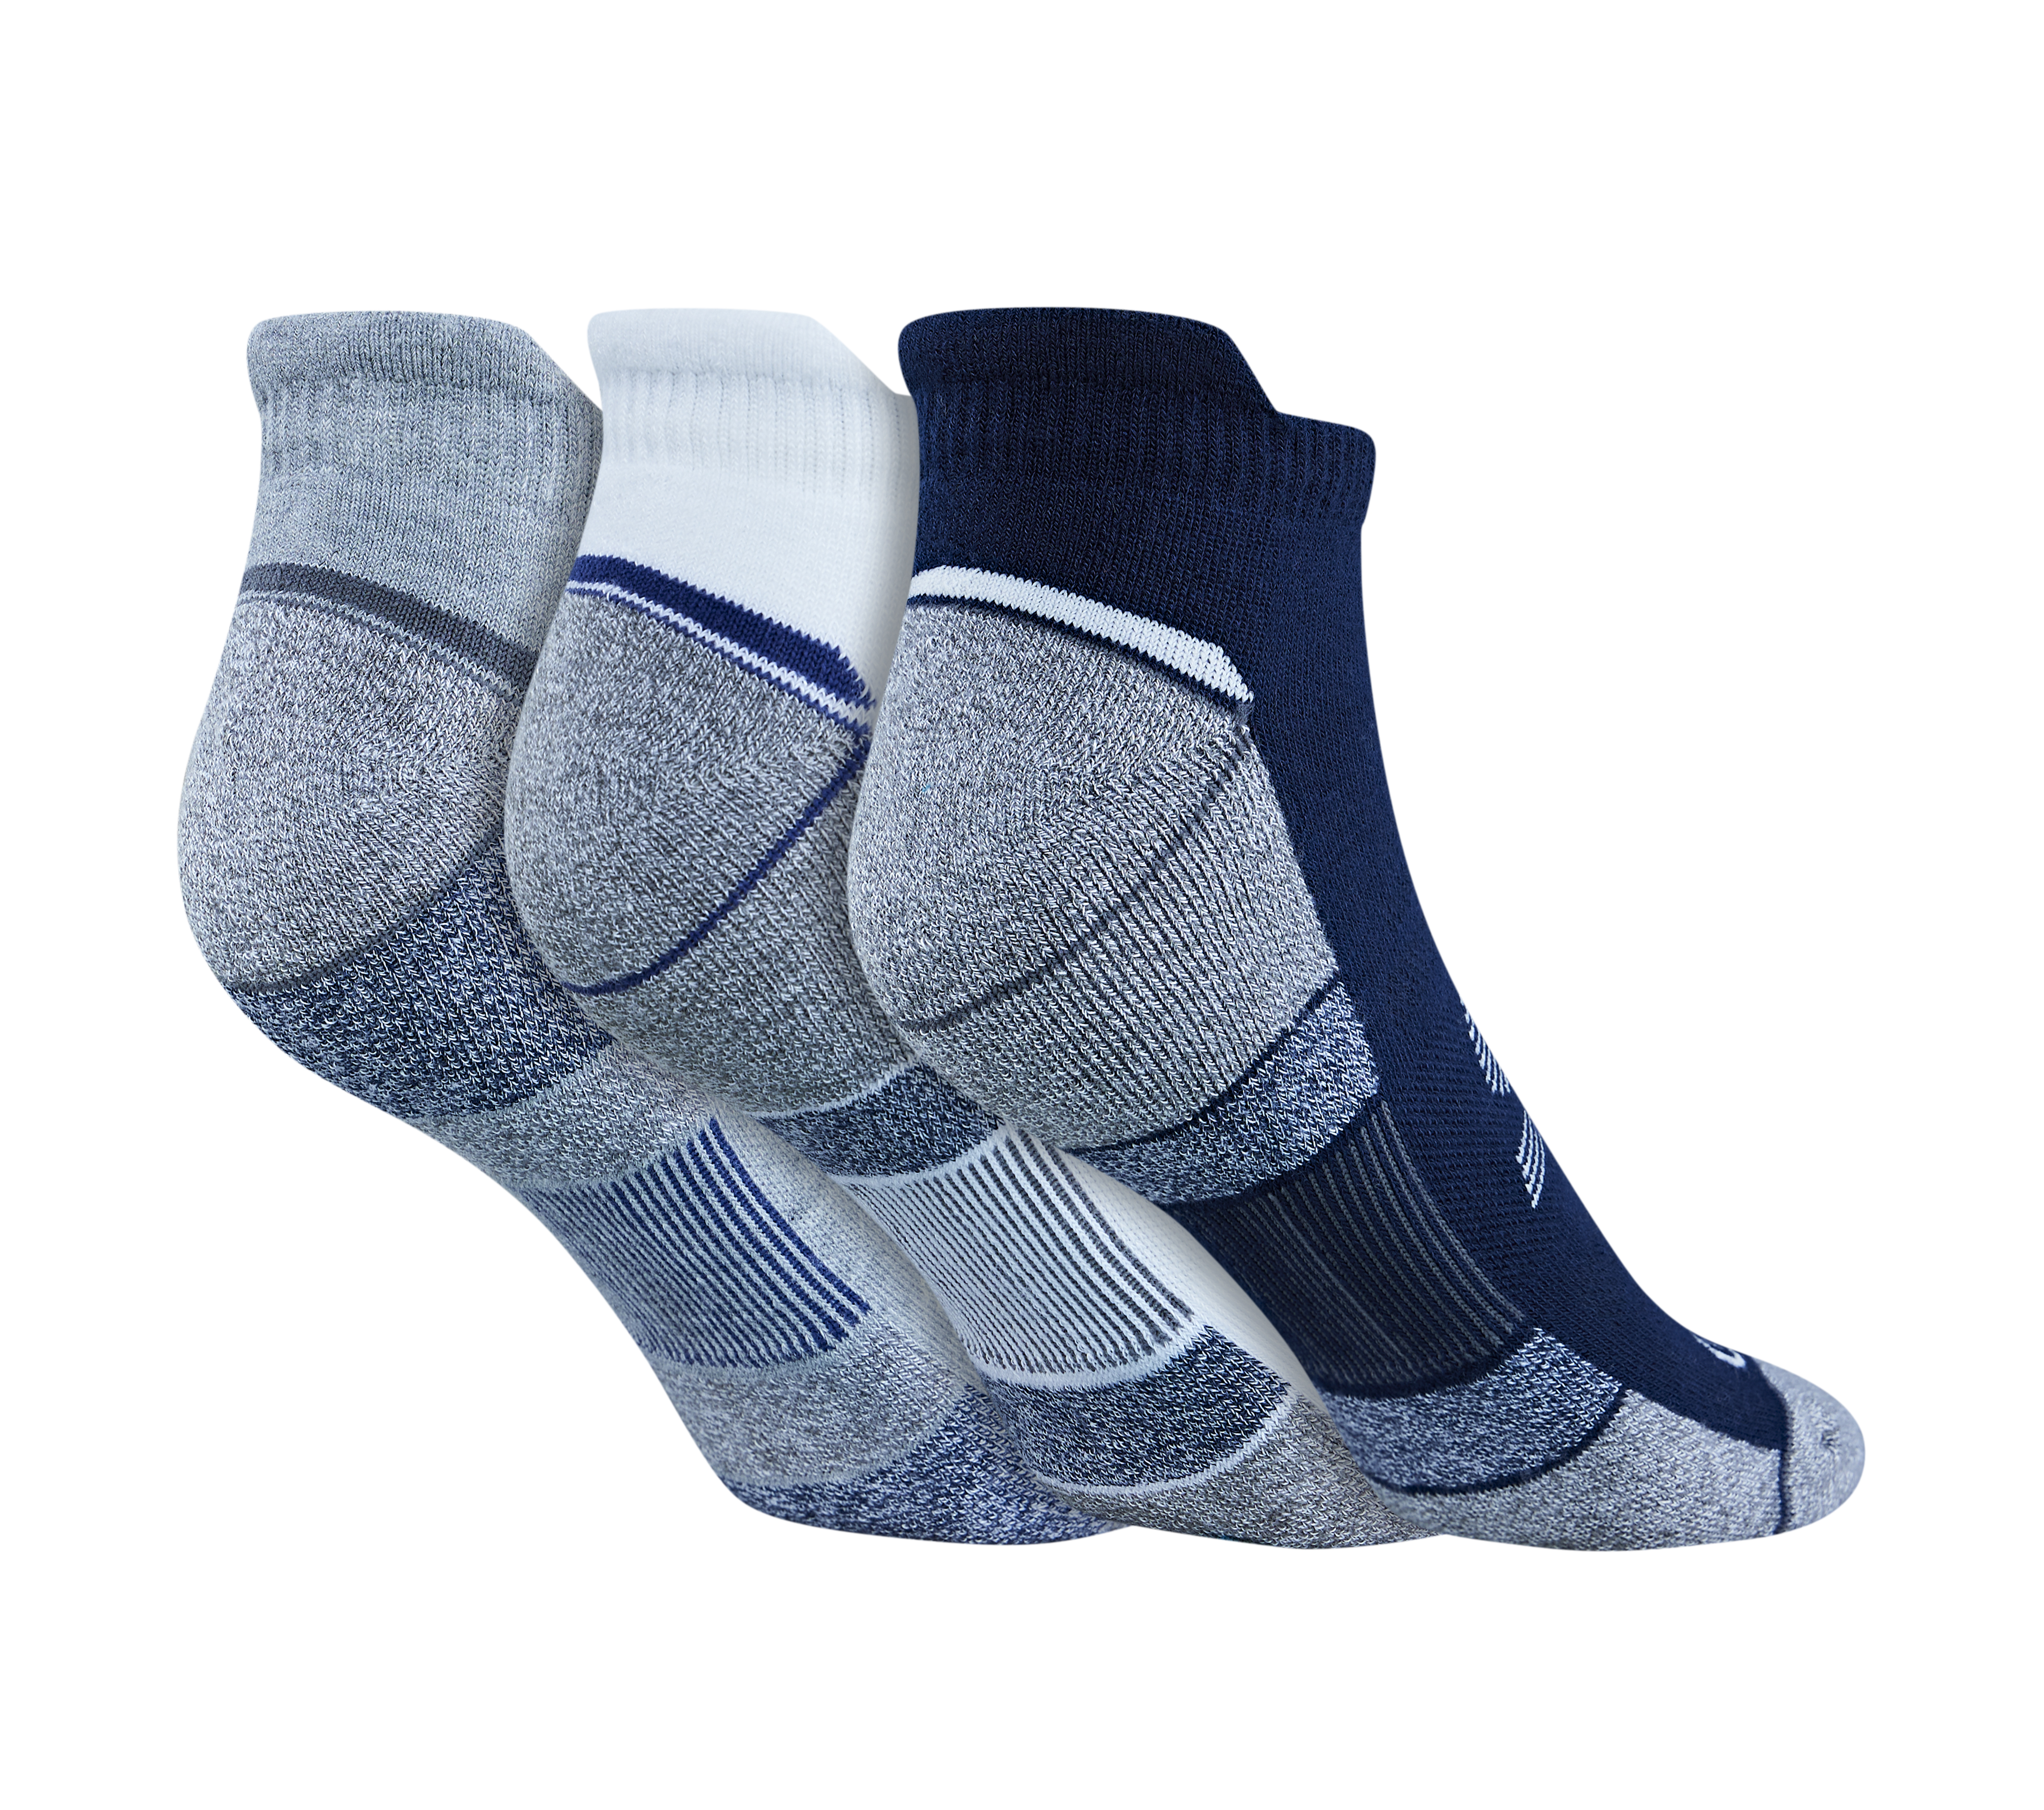 3PK MENS 1/2 TERRY LOW CUT, WHITE/NAVY/GREY Accessories Top View